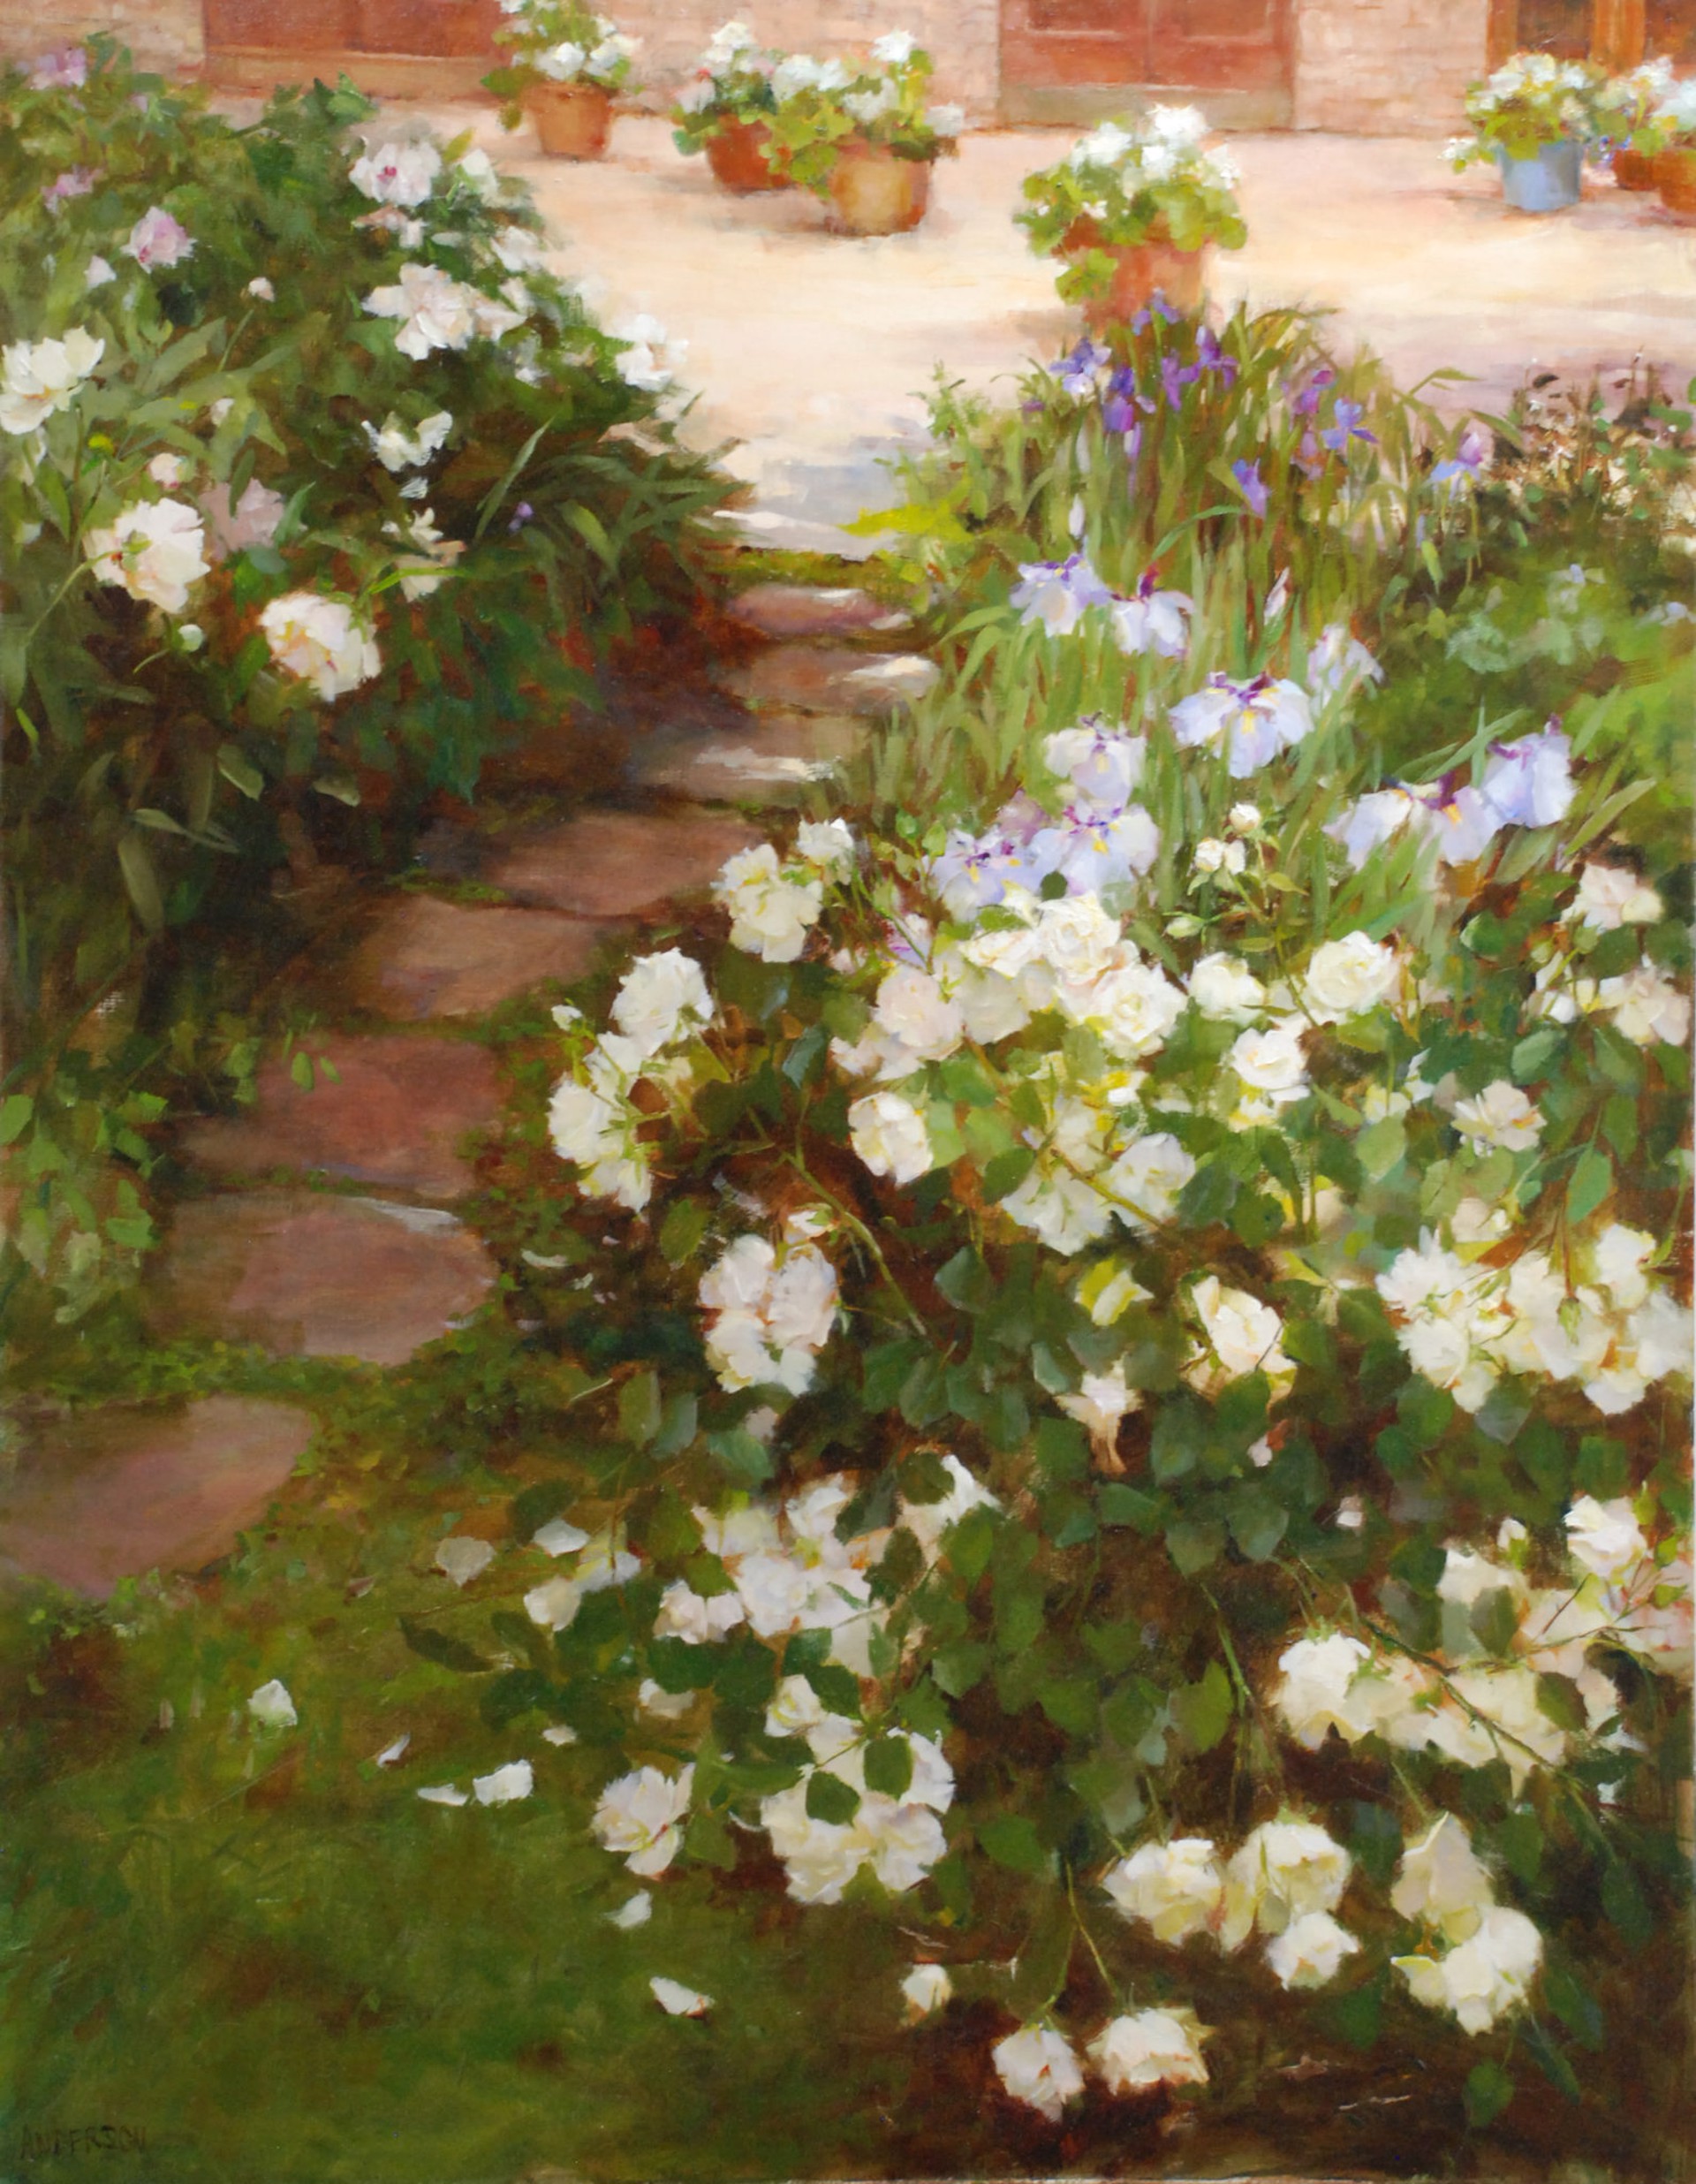 Sunlit Patio by Kathy Anderson